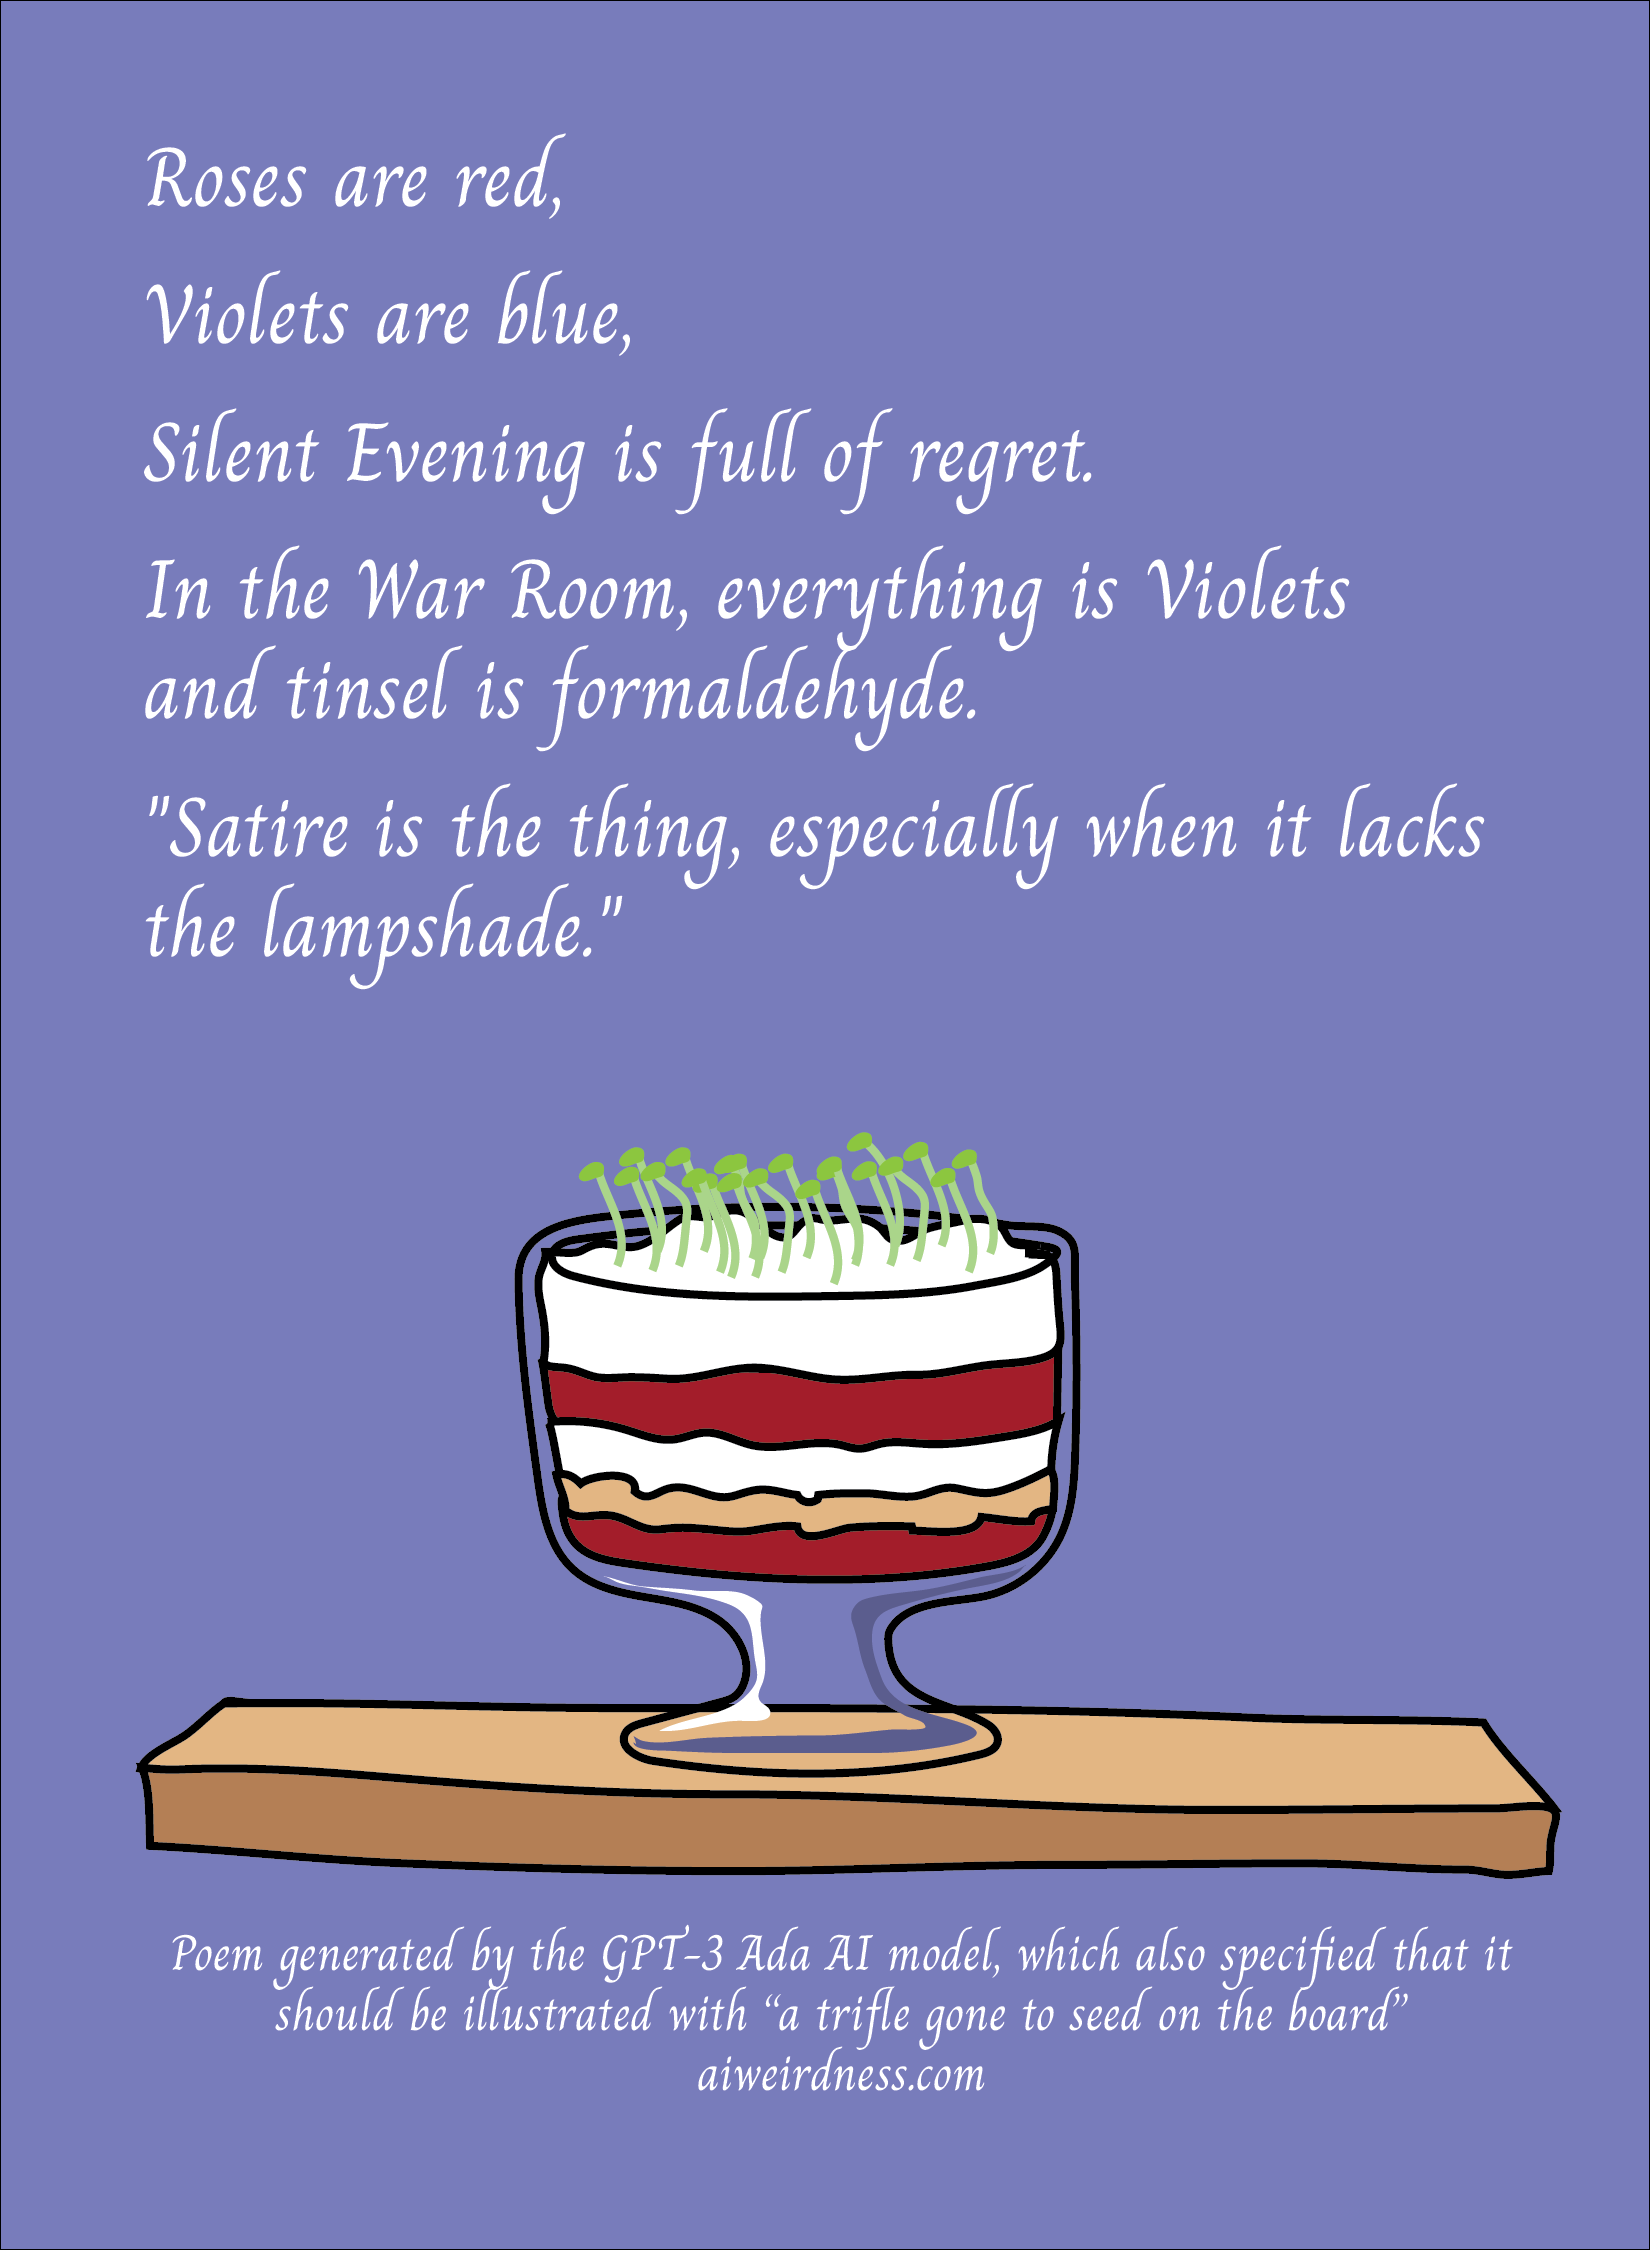 Roses are red, Violets are blue, Silent Evening is full of regret. In the War Room, everything is Violets and tinsel is formaldehyde. "Satire is the thing, especially when it lacks the lampshade."